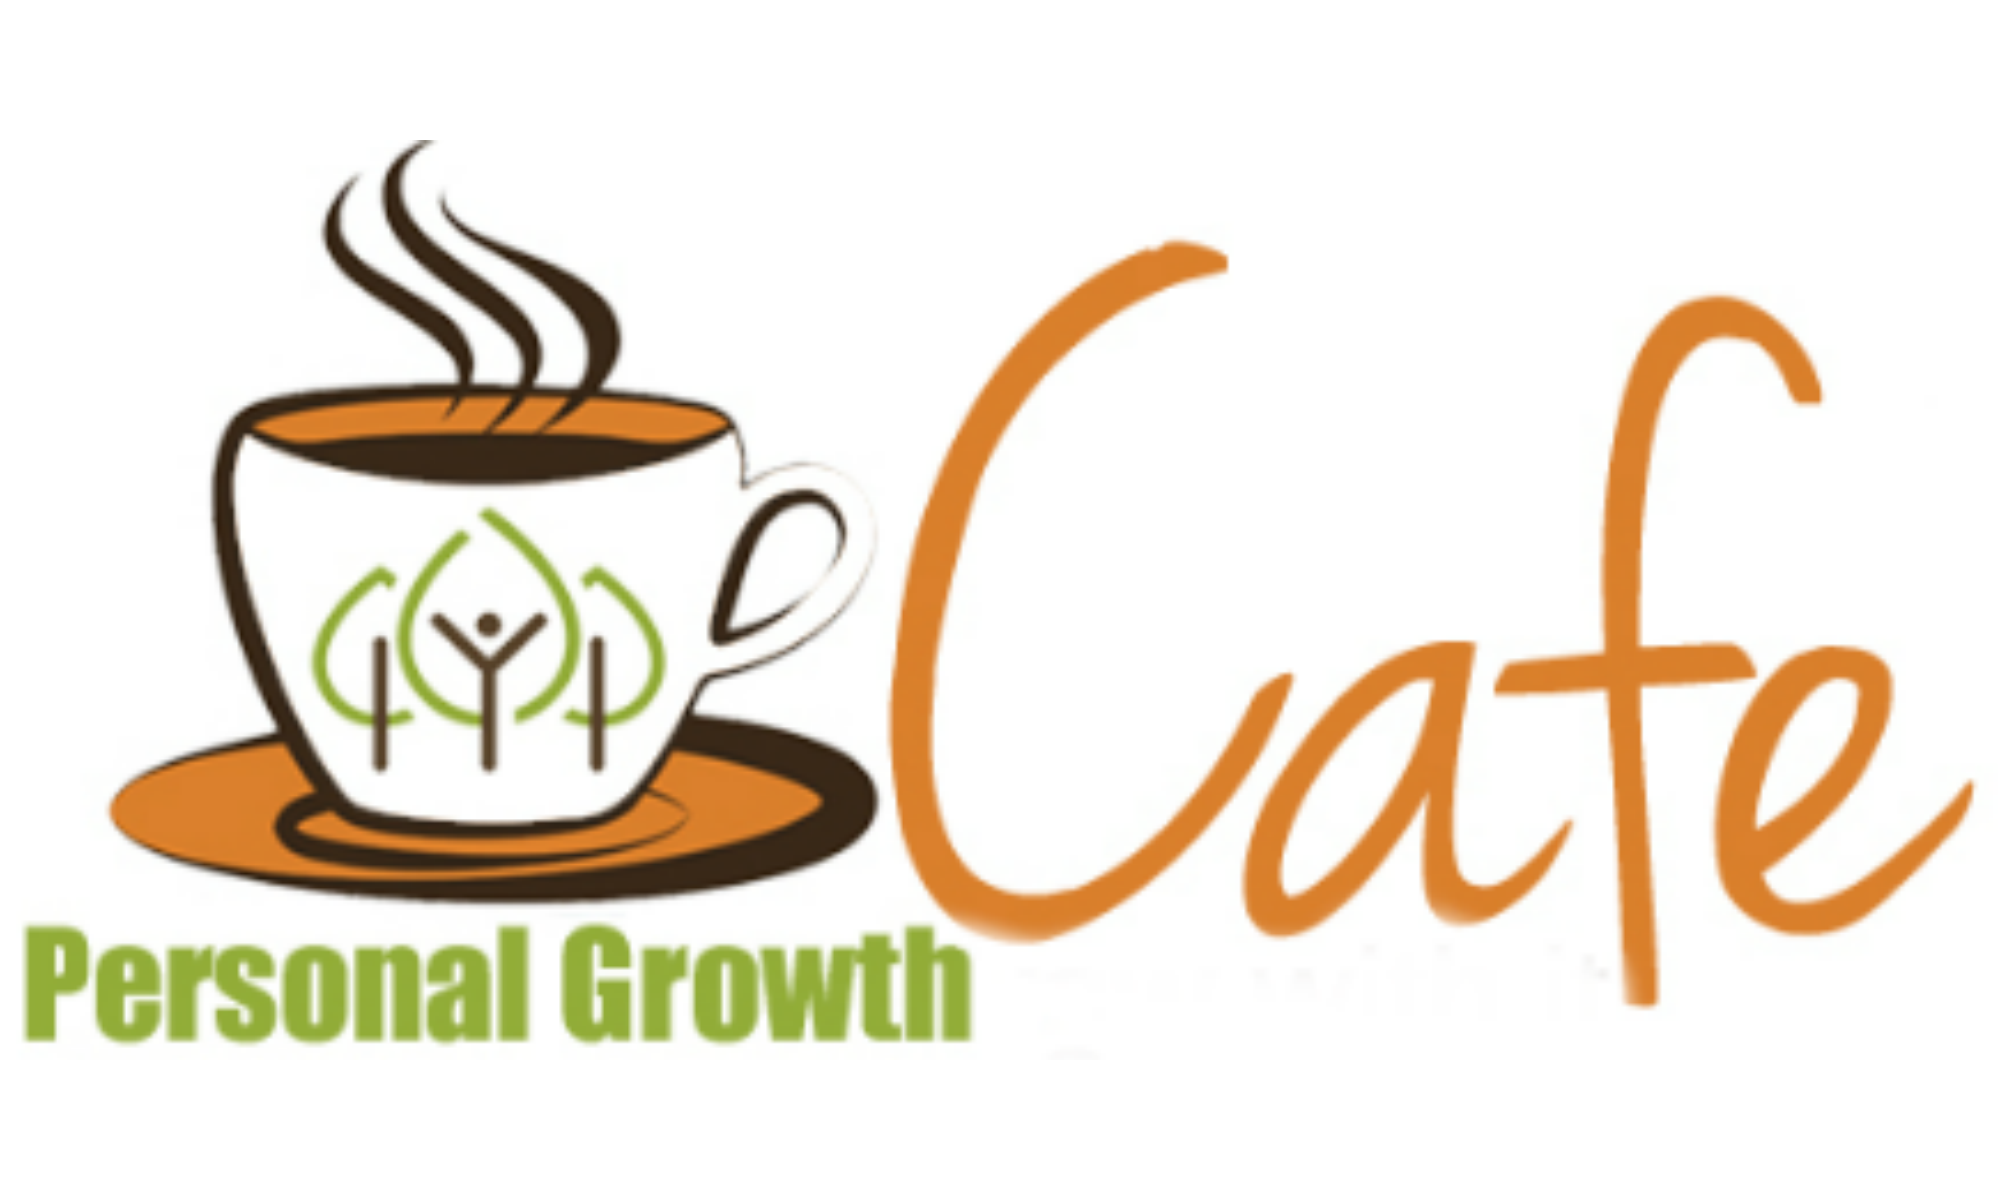 Personal Growth Cafe